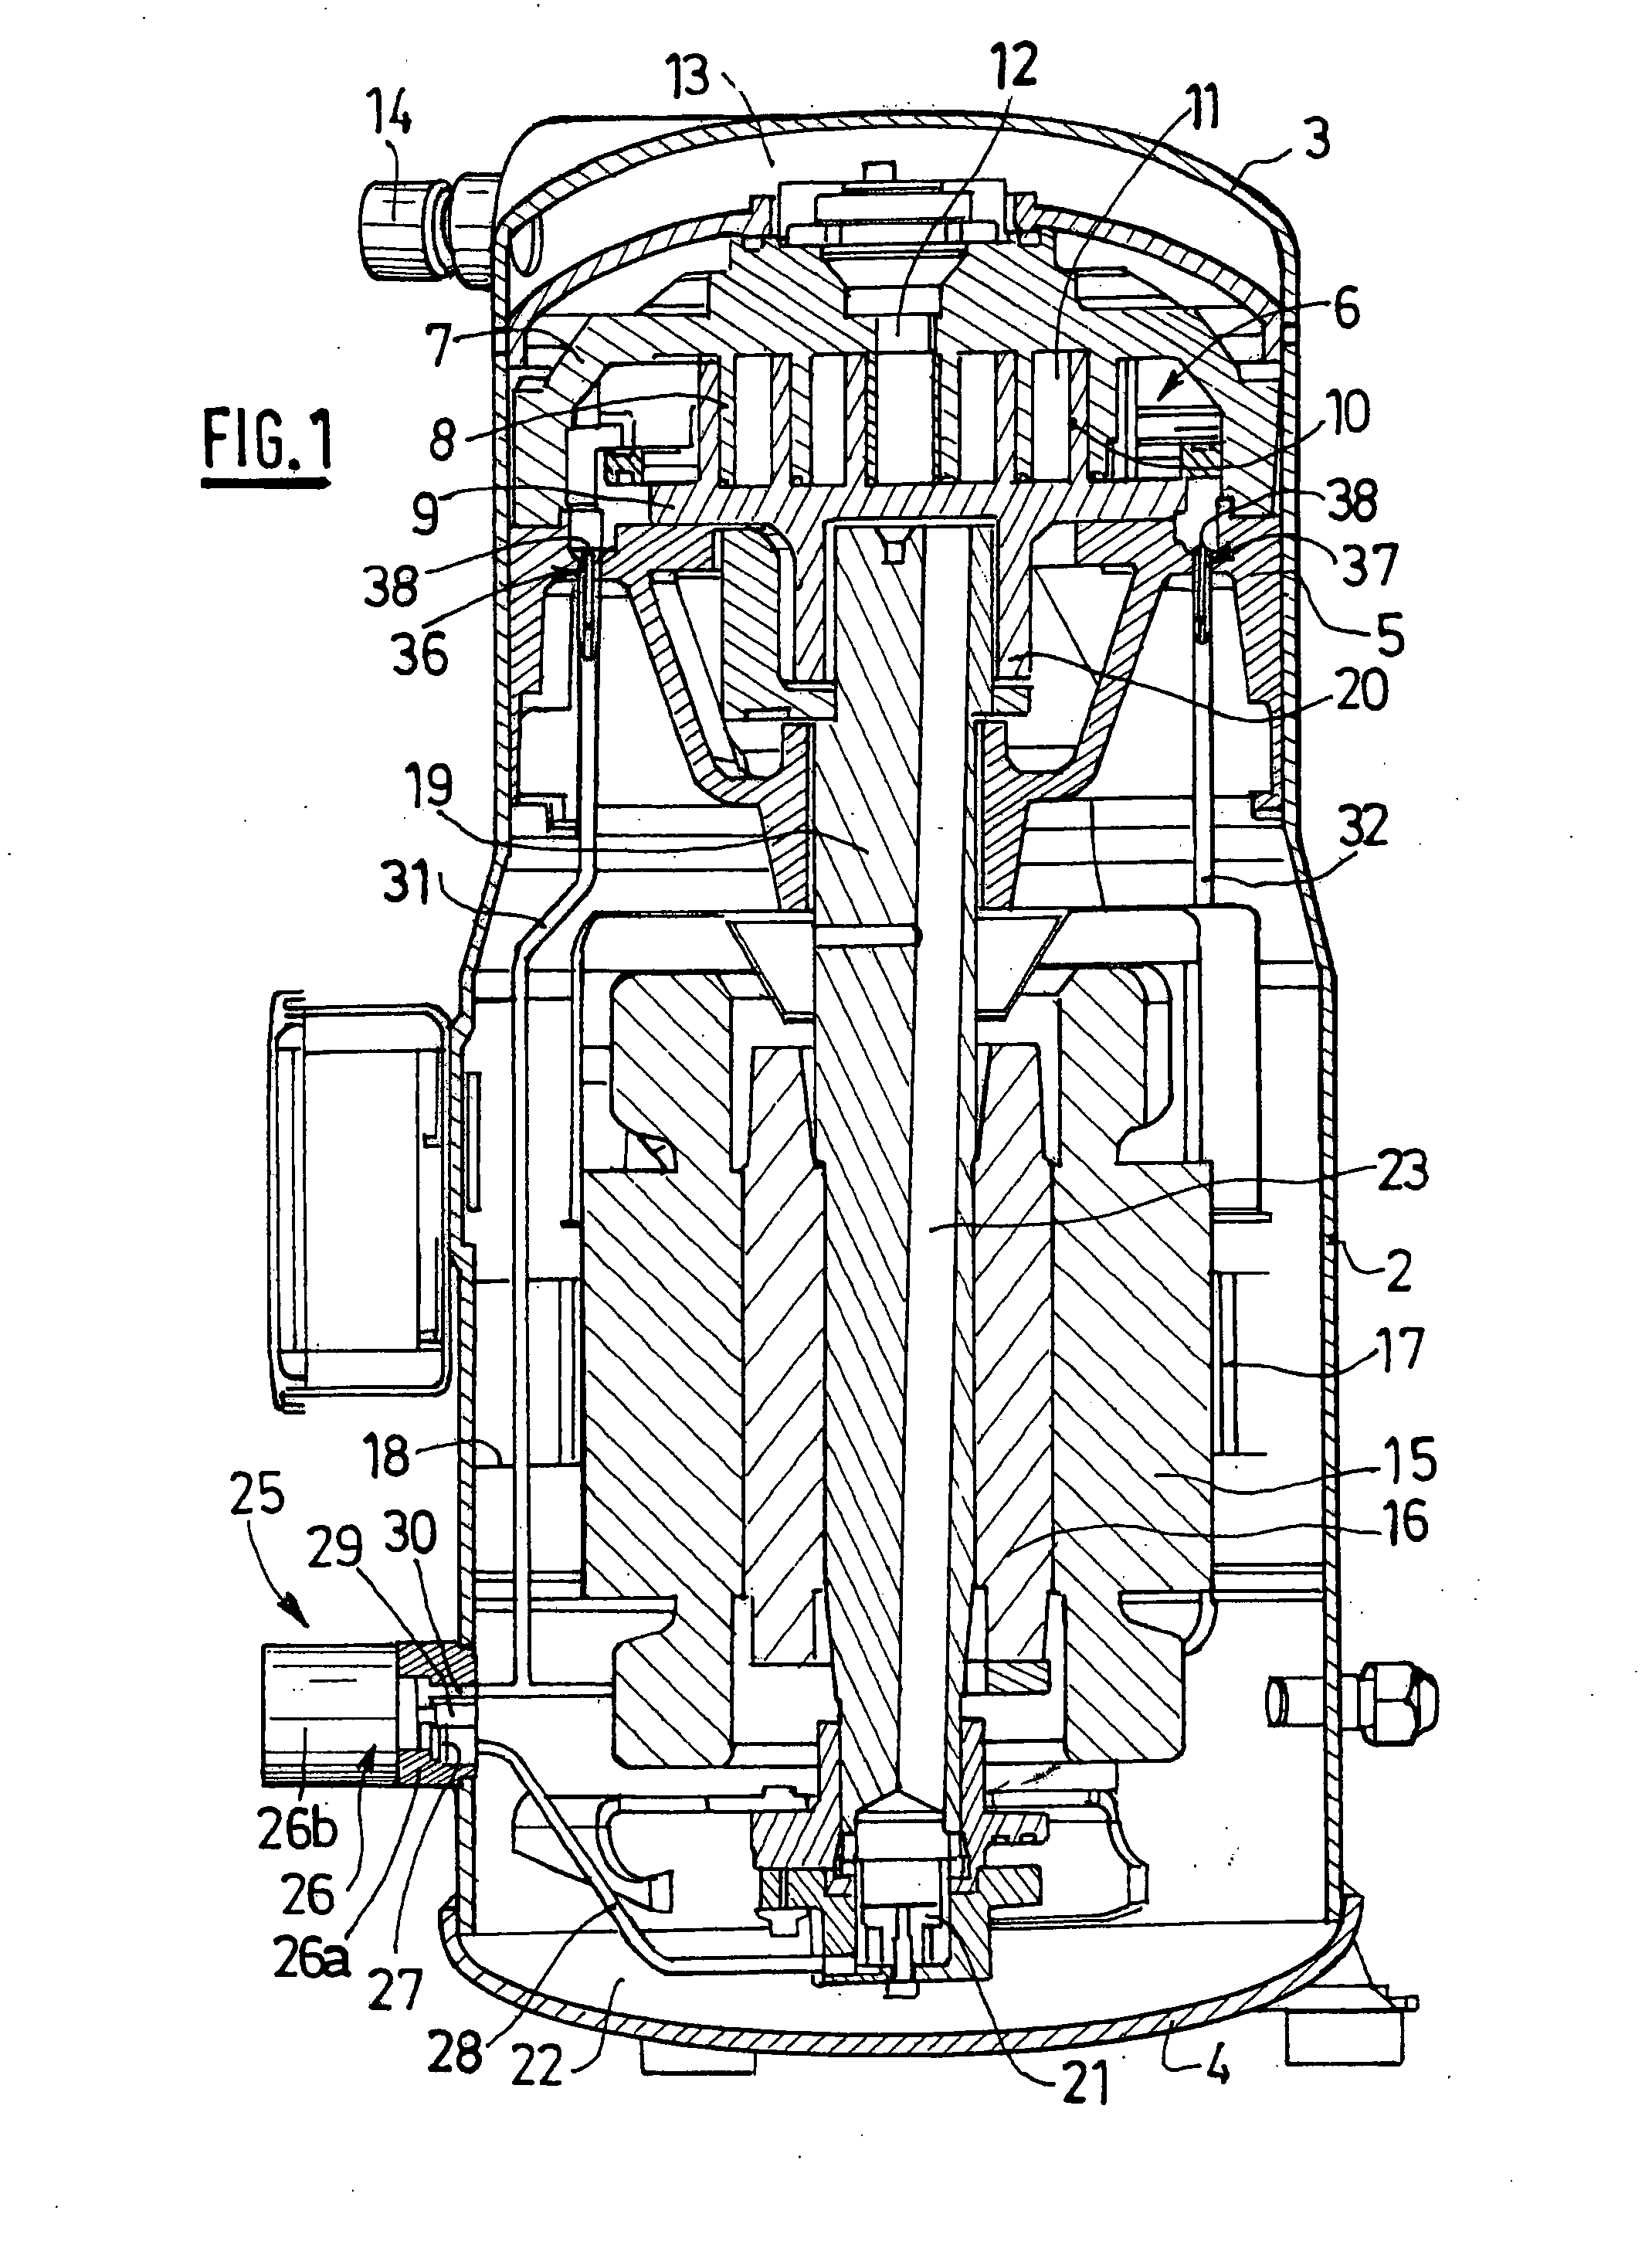 Variable-speed scroll-type refrigeration compressor